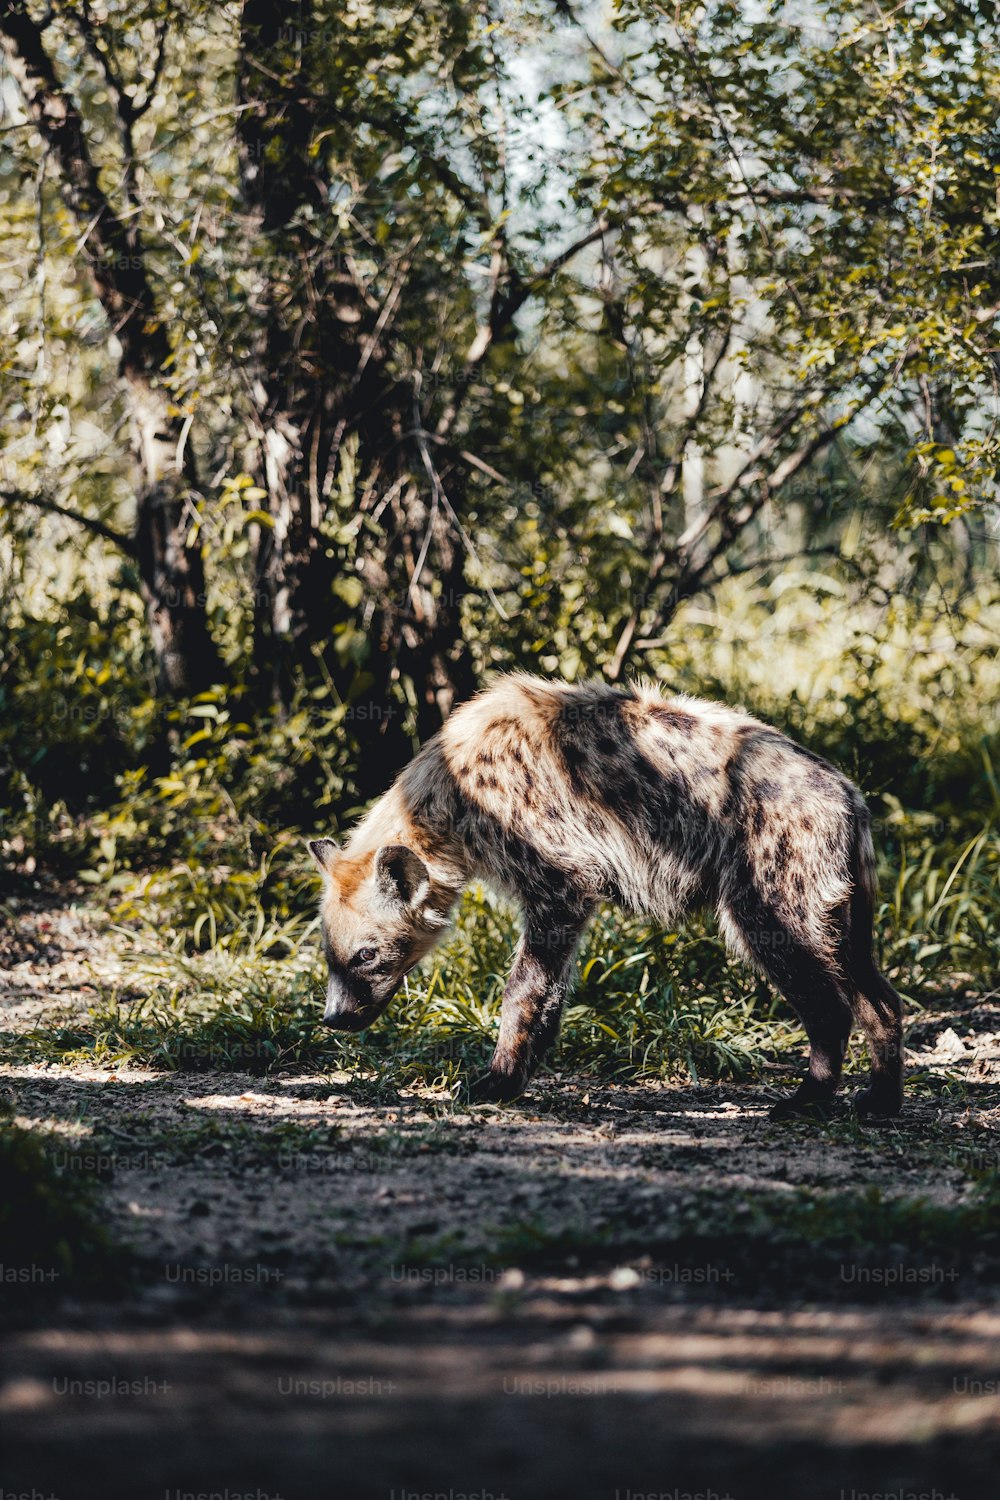 a hyena walking in the grass